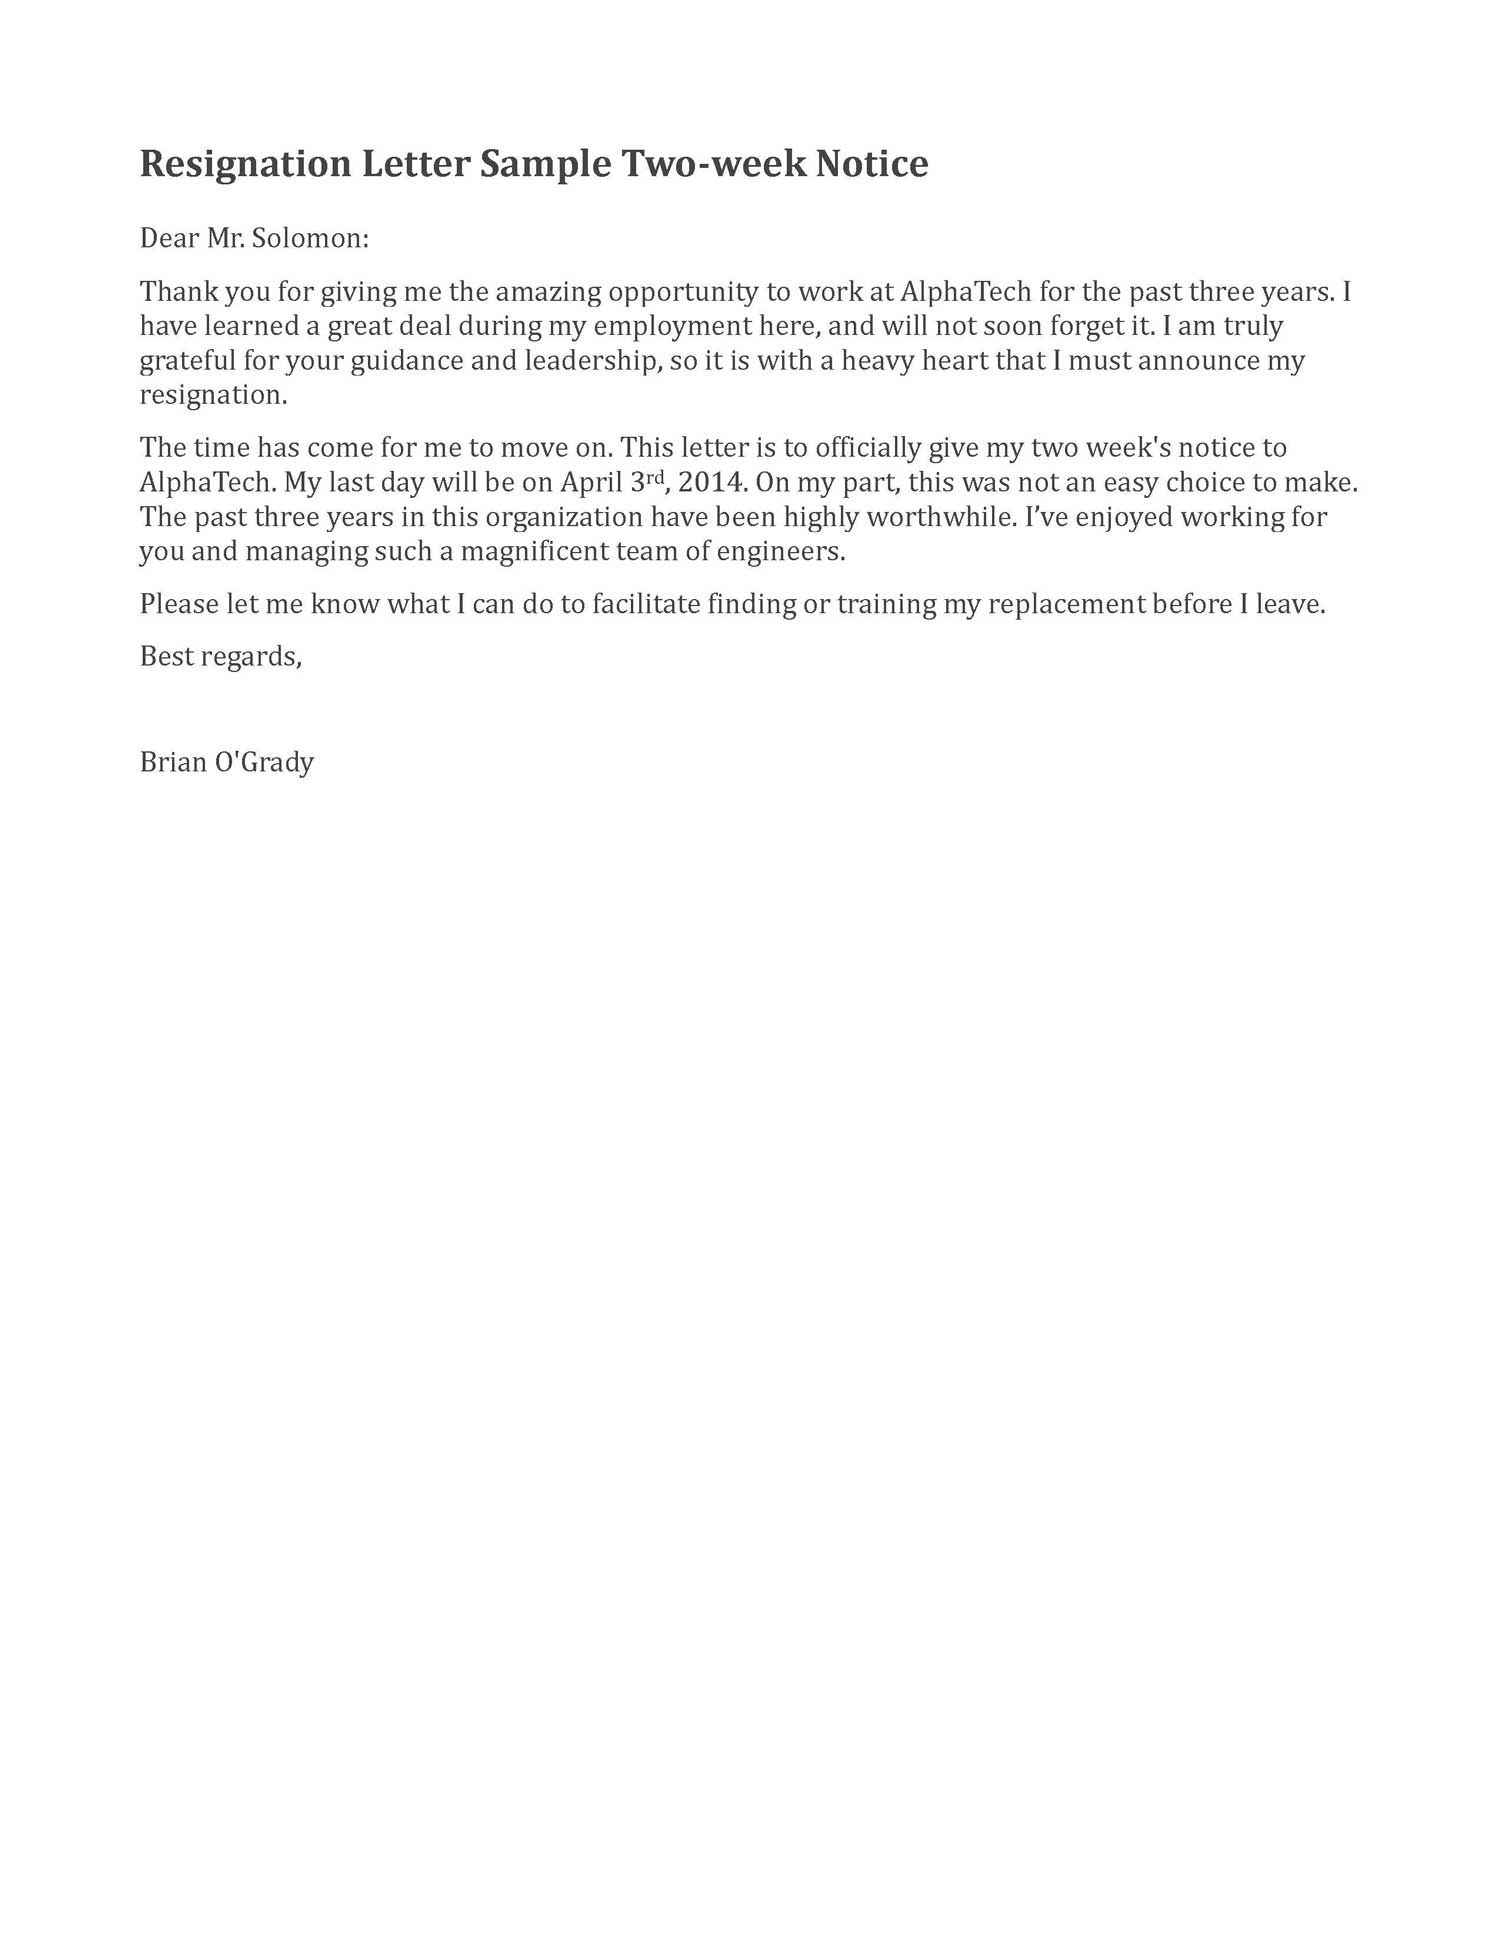 Resignation Letter Sample 2 Weeks Notice - Google Search